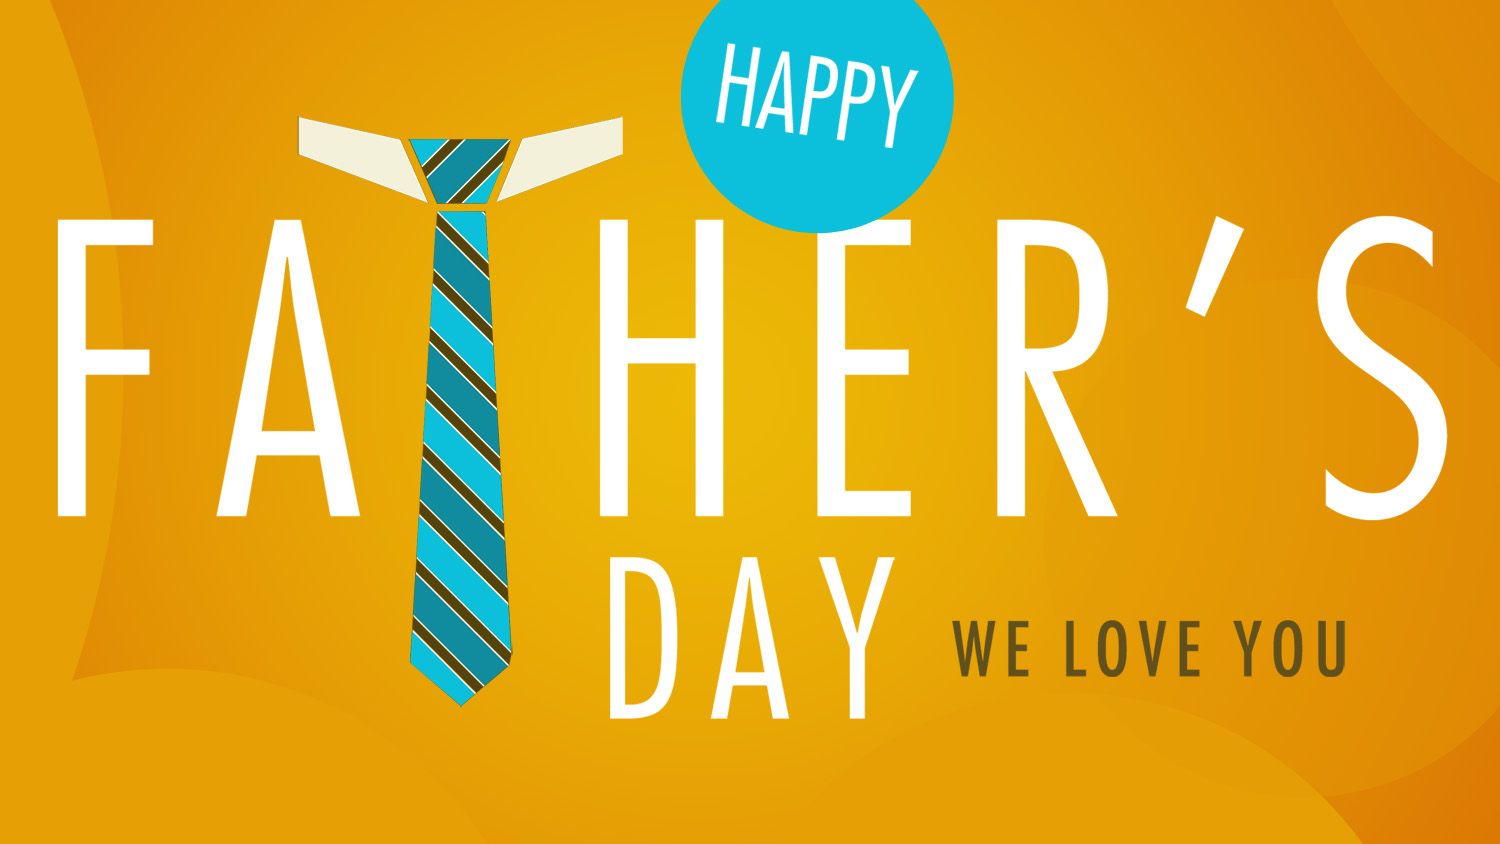 Fathers Day Desktop Wallpapers One HD Wallpaper Pictures